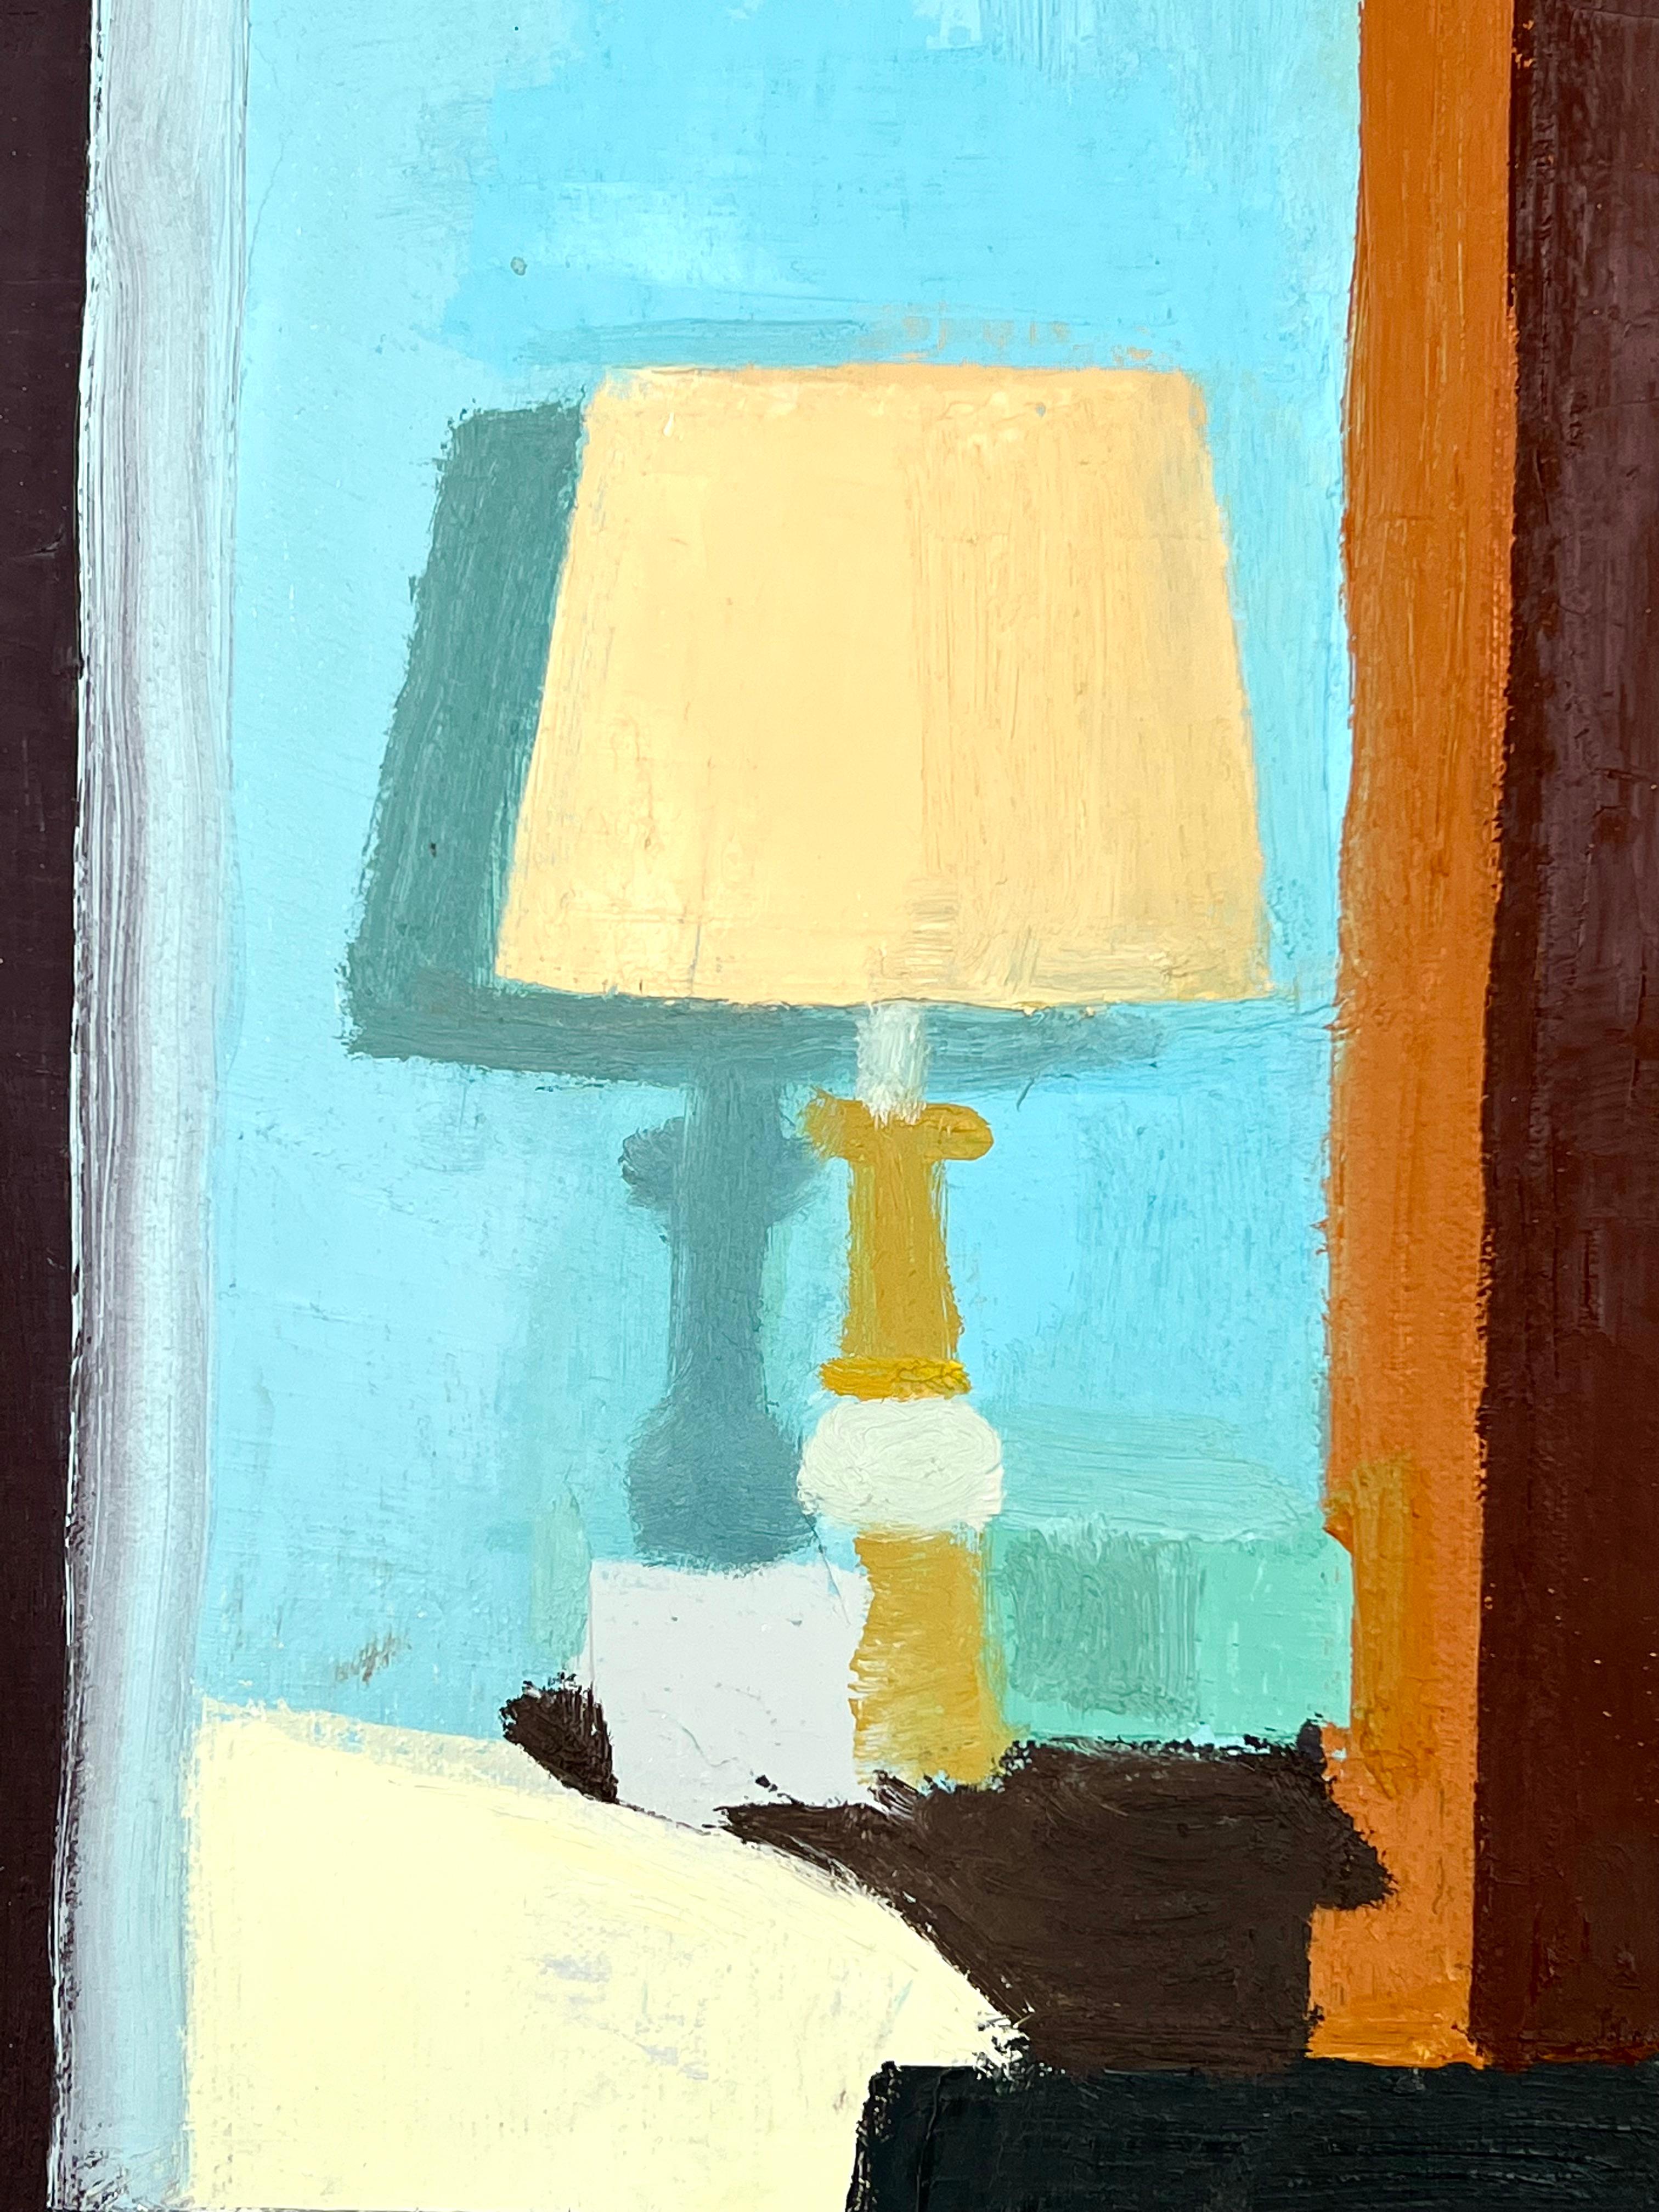 Hallway [Reflected] in the Dresser Mirror - Painting by Benjamin Frederick